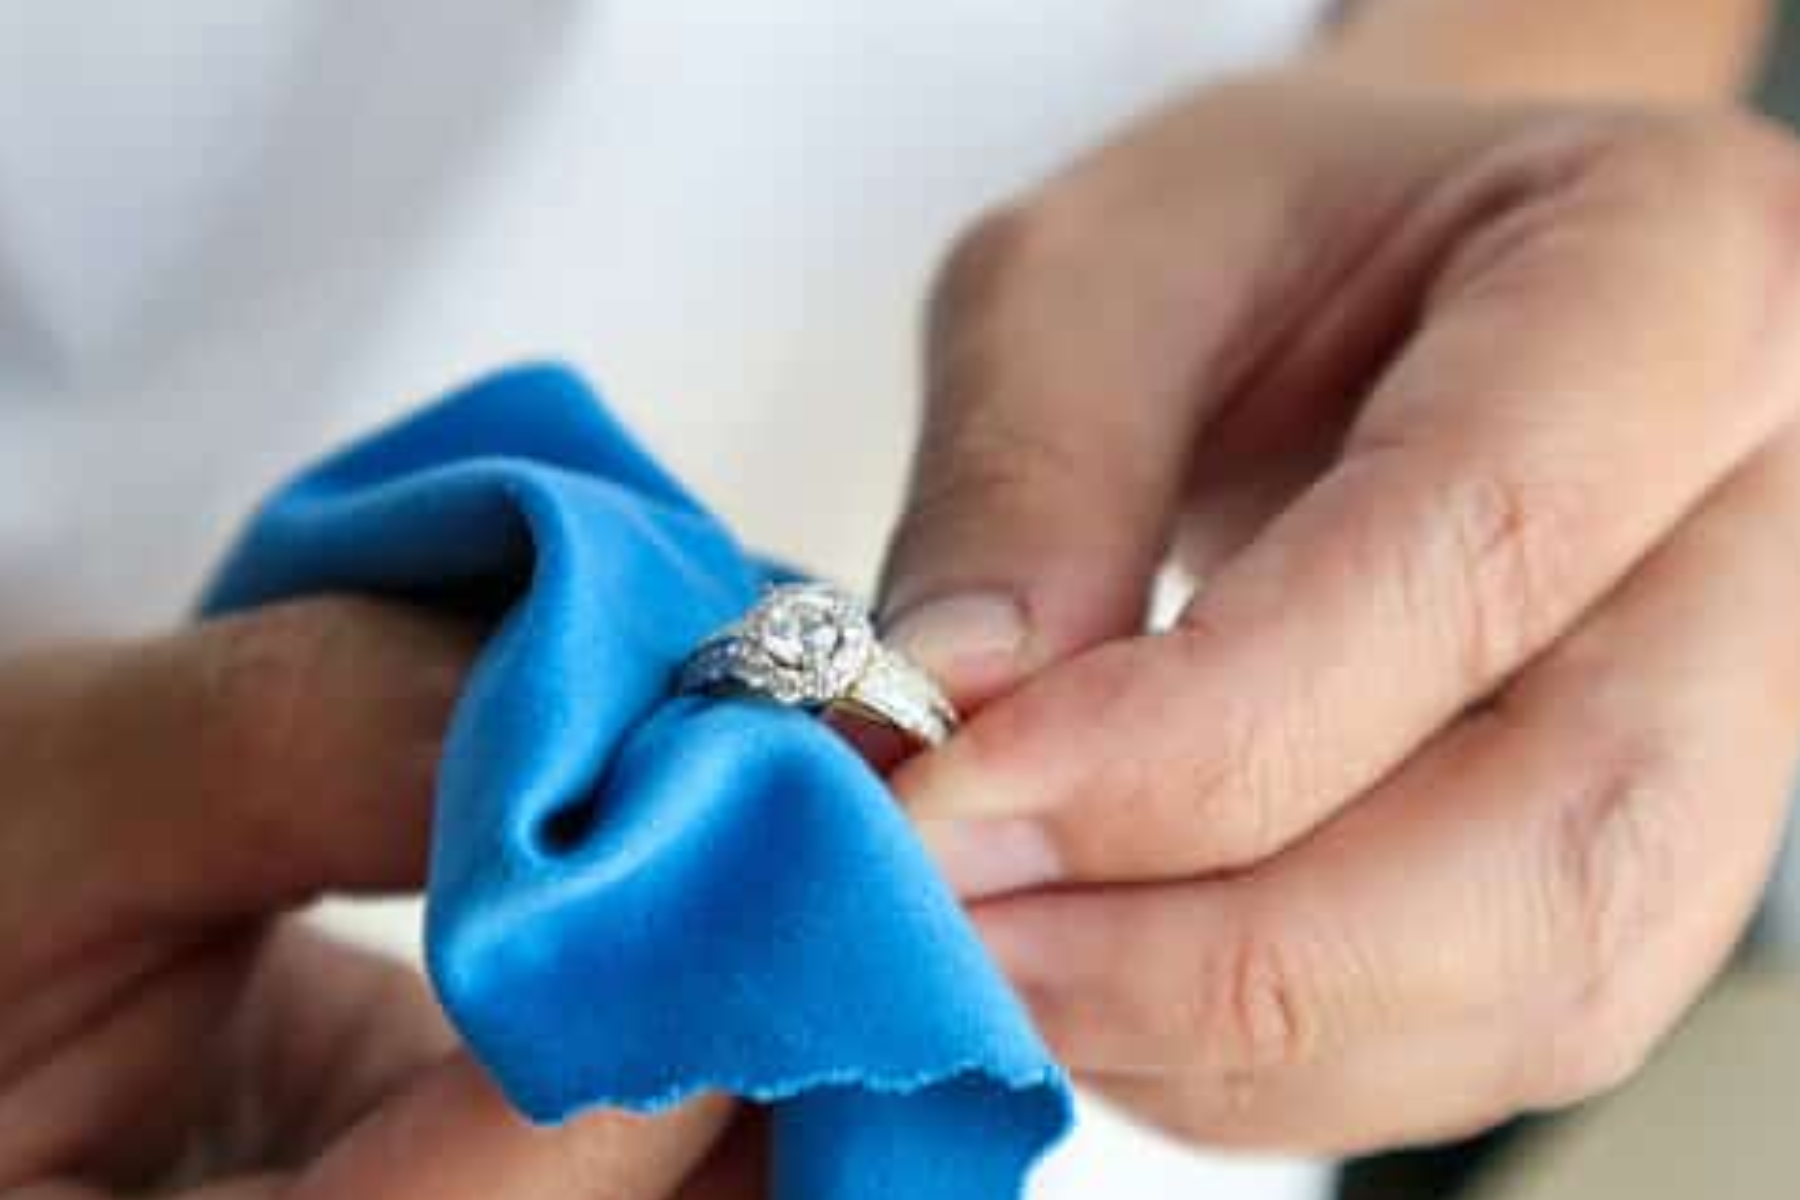 Blue cotton is used by an individual's hand to clean a ring